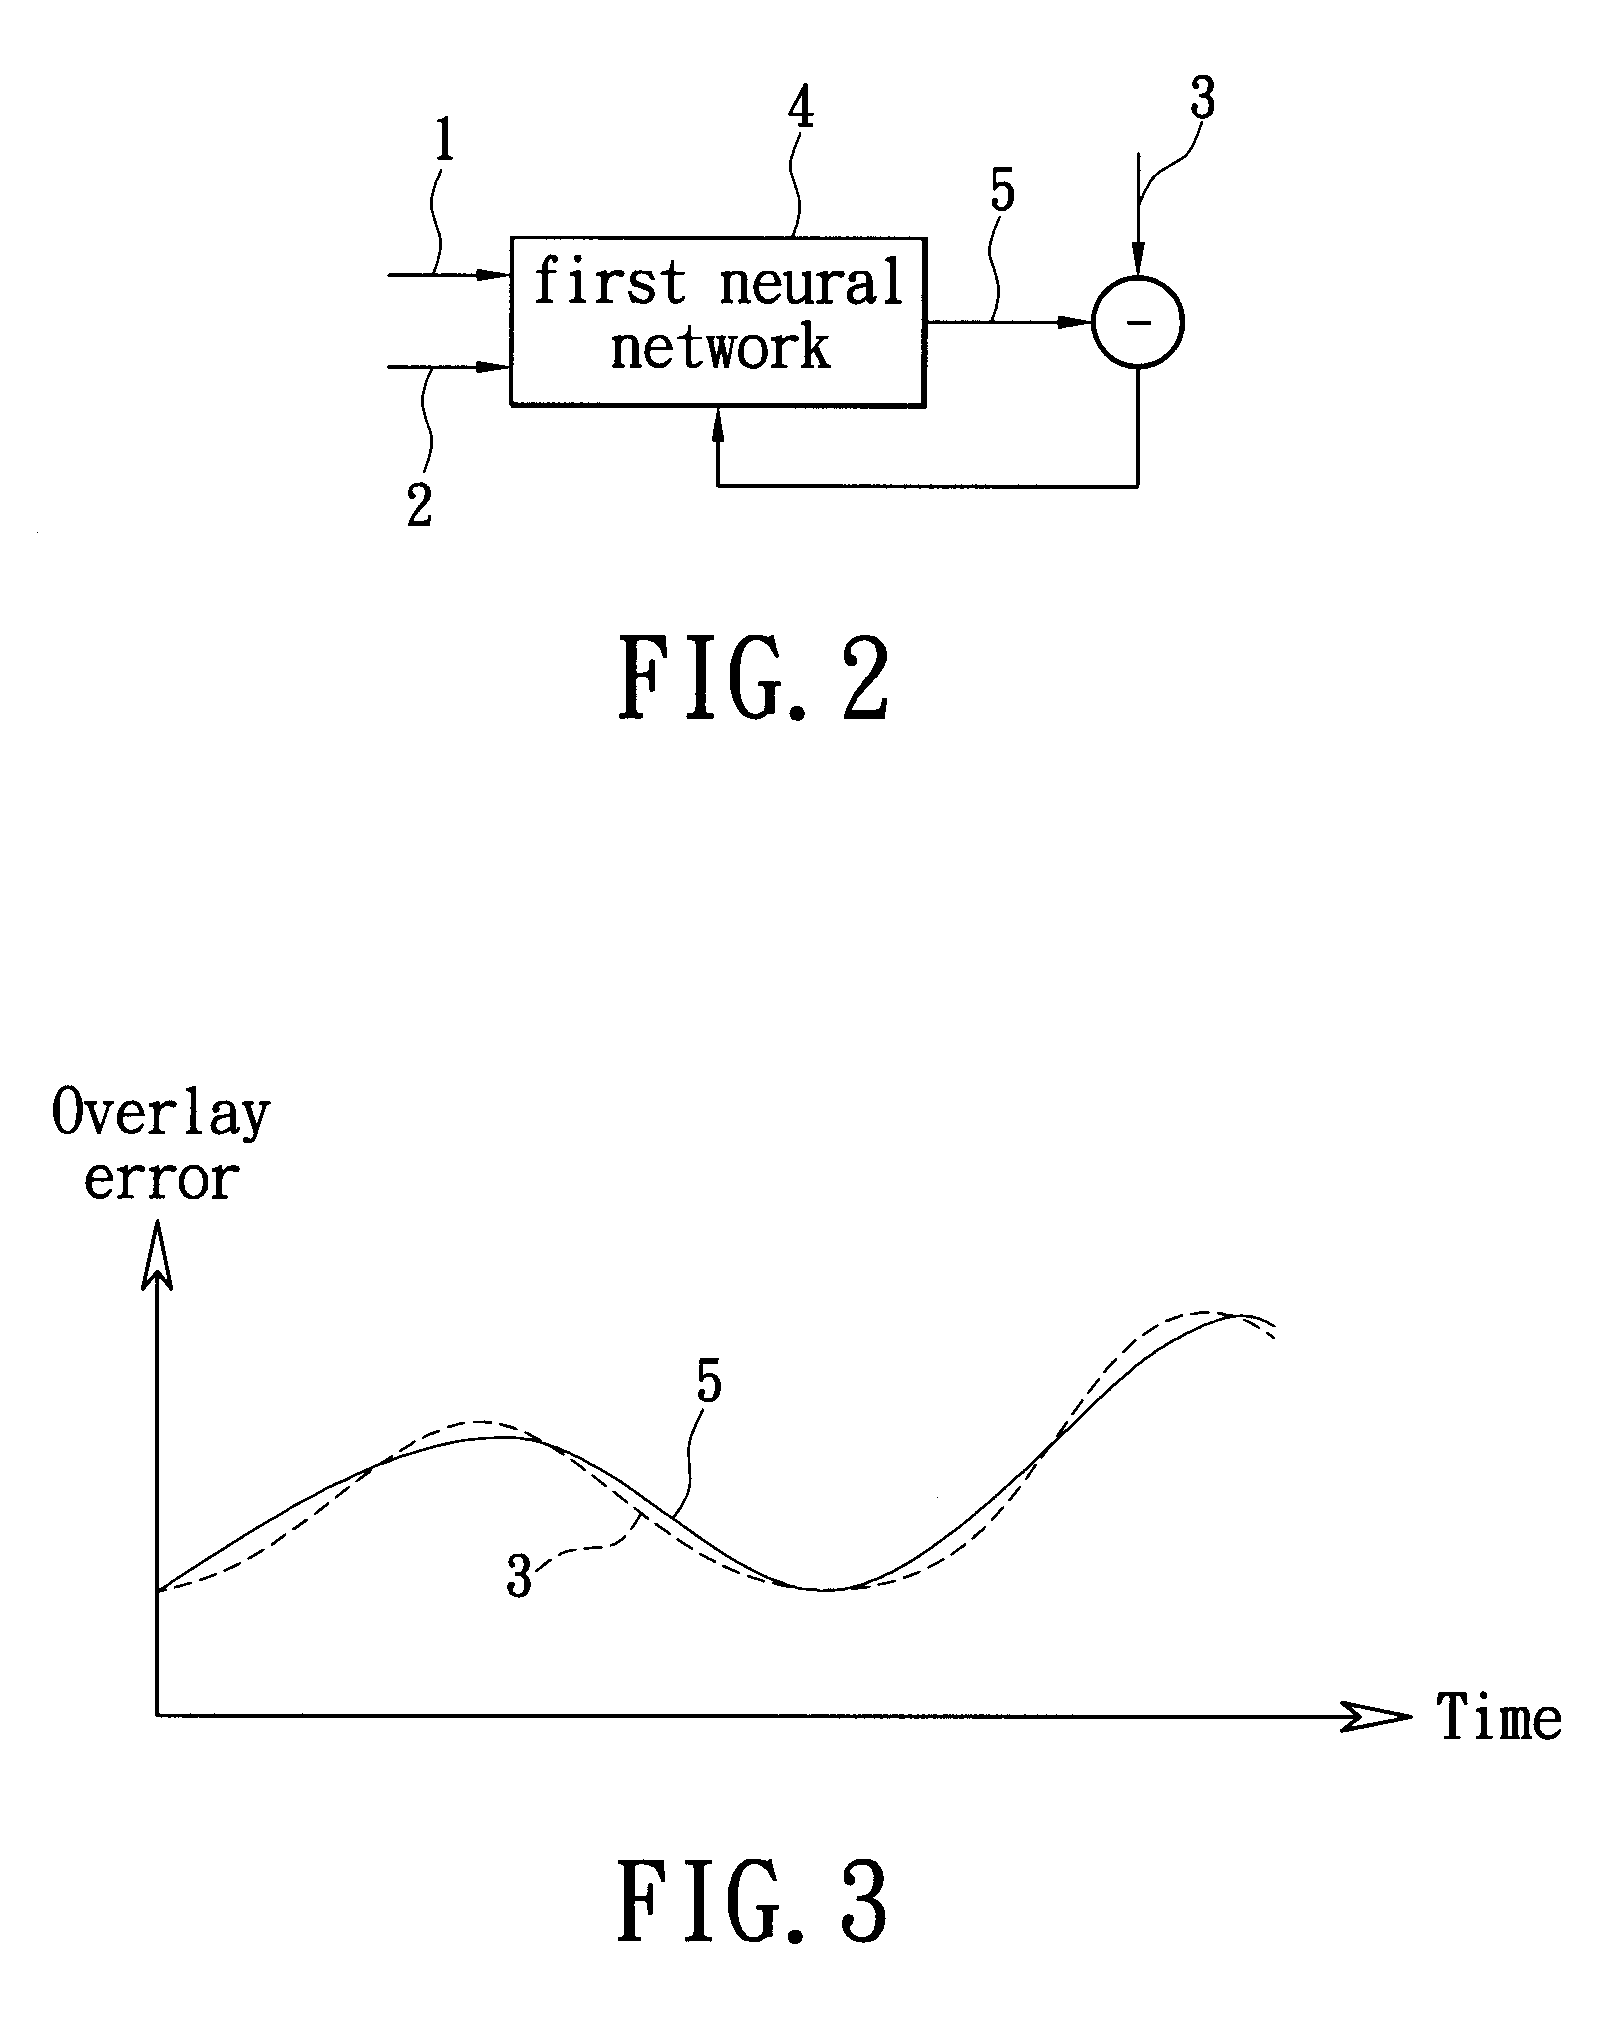 Method for projecting wafer product overlay error and wafer product critical dimension